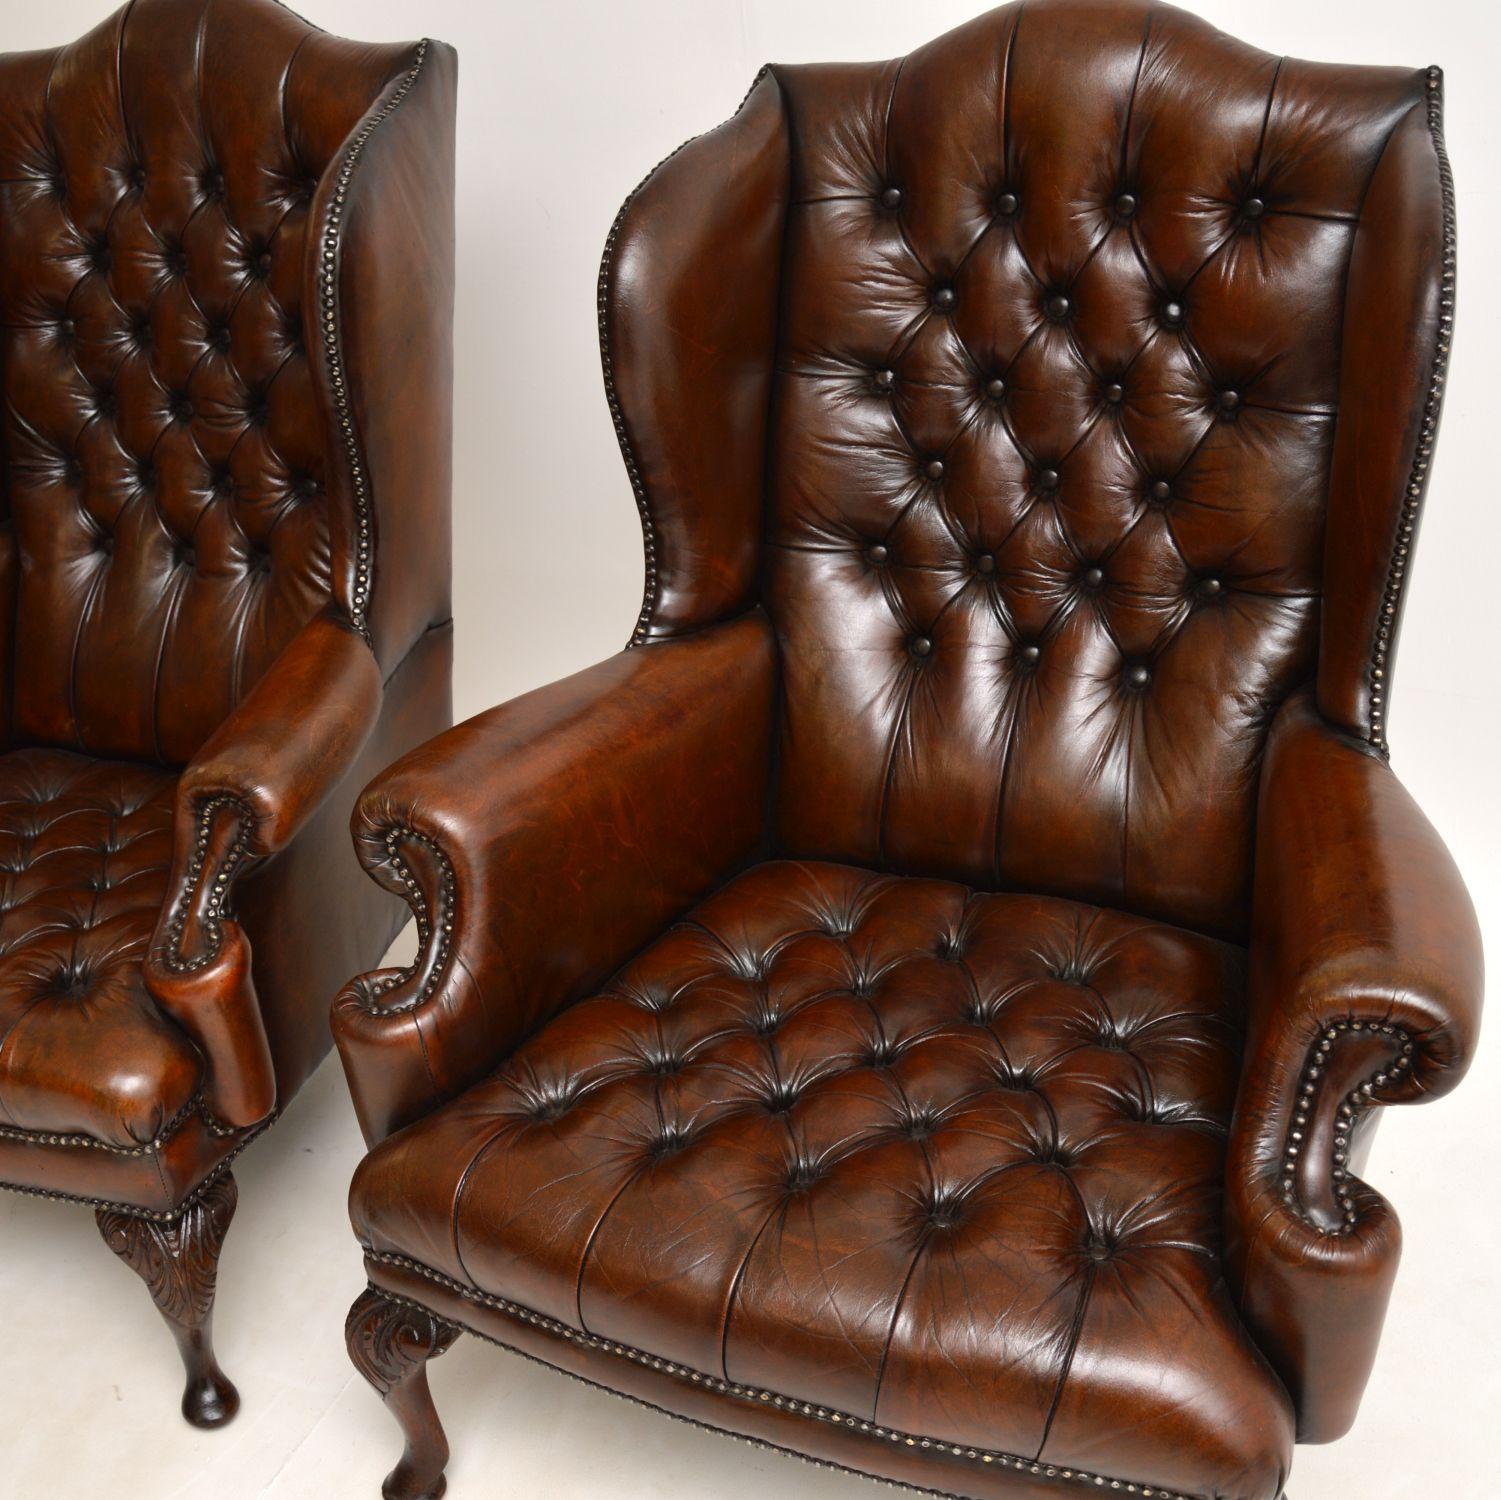 English Pair of Antique Leather Wing Back Armchairs